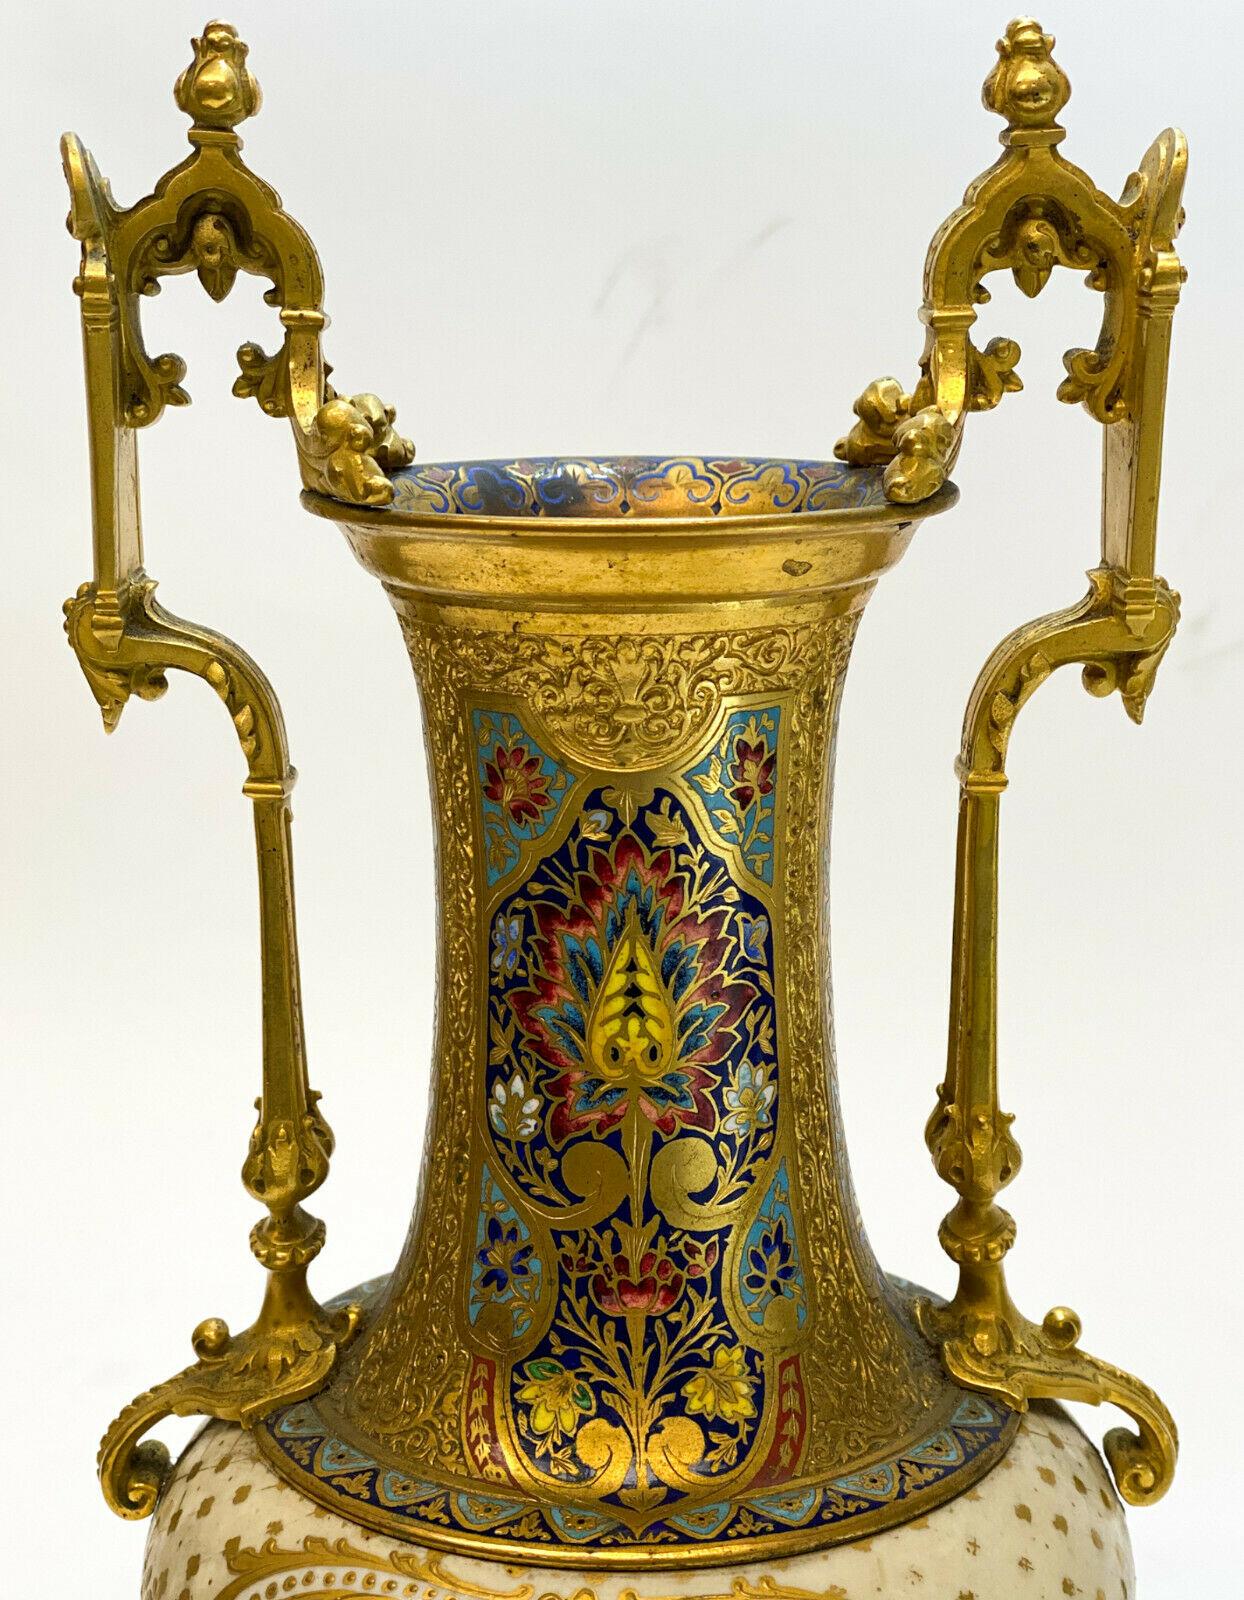 Early 20th Century Sevres Porcelain Champleve Enamel Gilt Bronze Mounted Twin Handled Vase For Sale